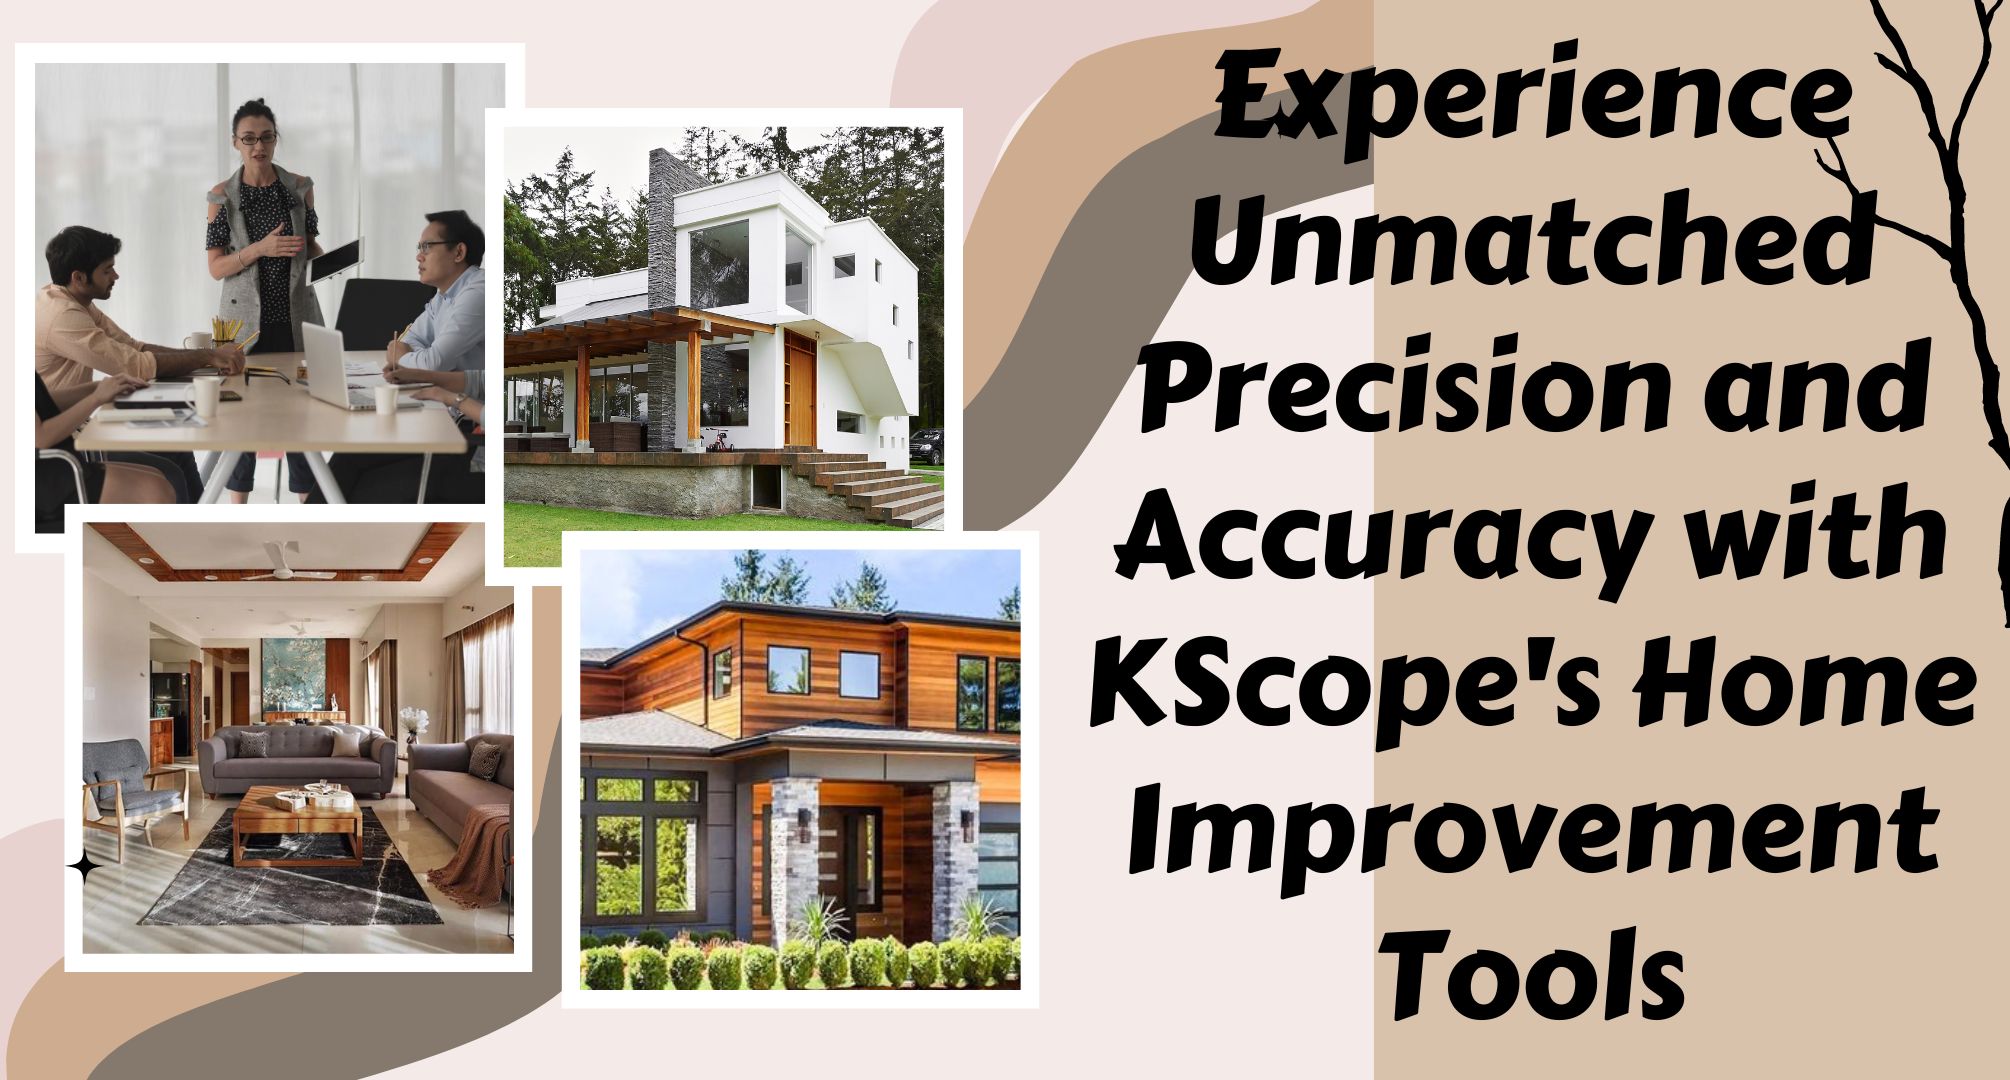 Experience Unmatched Precision and Accuracy with KScope's Home Improvement Tools